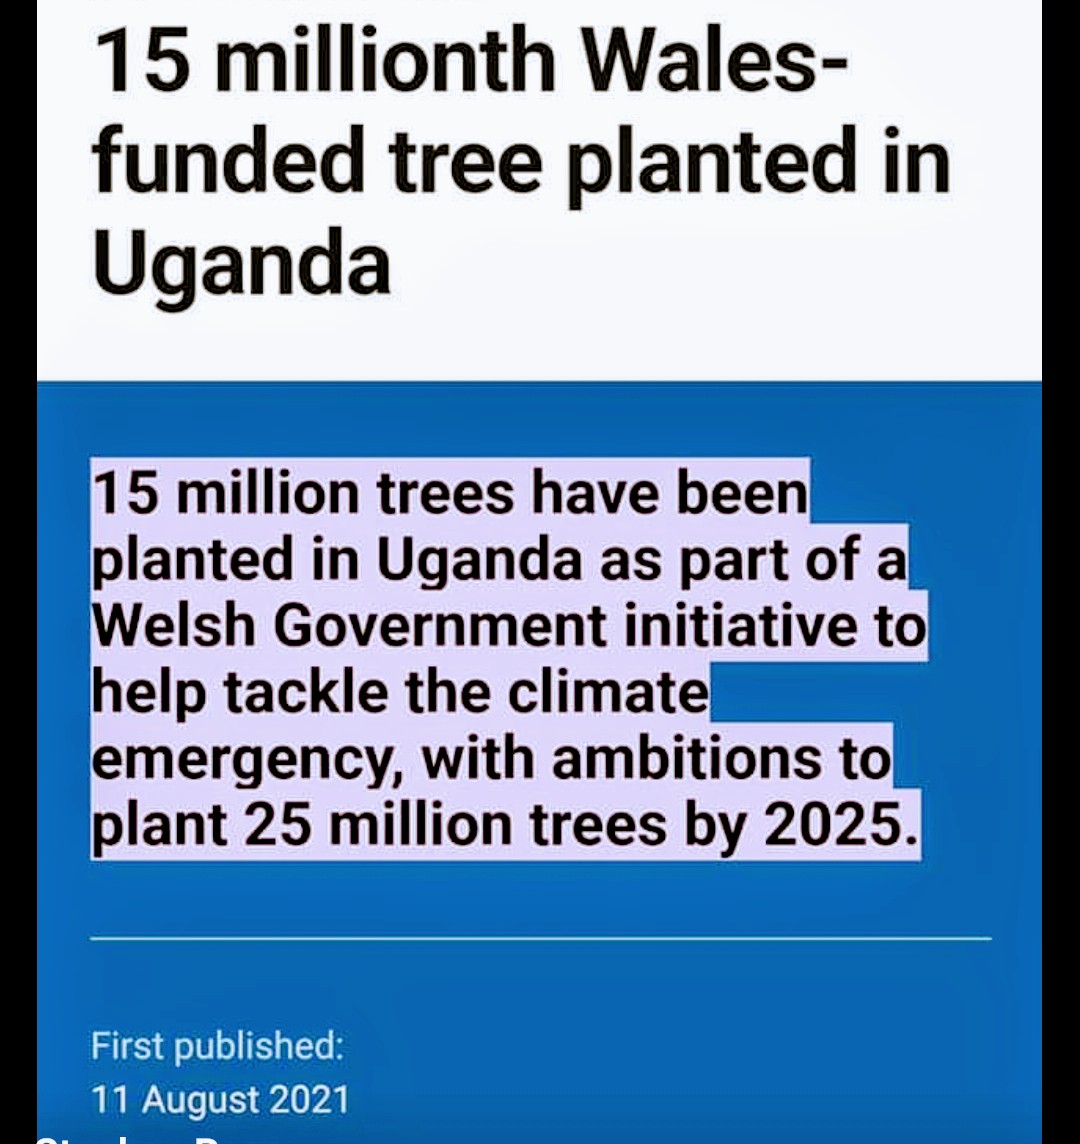 Ask them both if they intend to plant more trees in Uganda...
#WalesLive